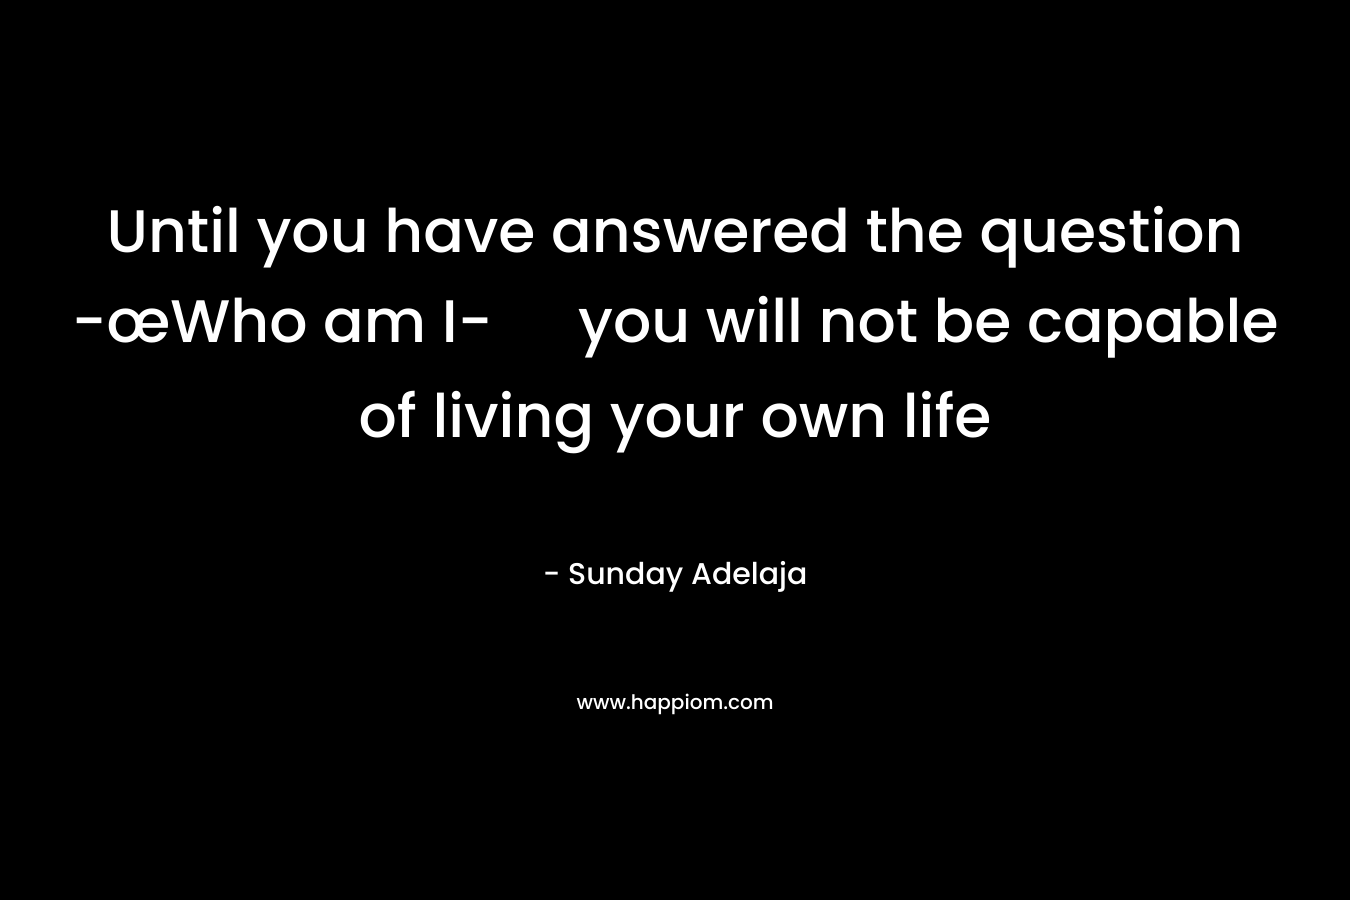 Until you have answered the question -œWho am I- you will not be capable of living your own life